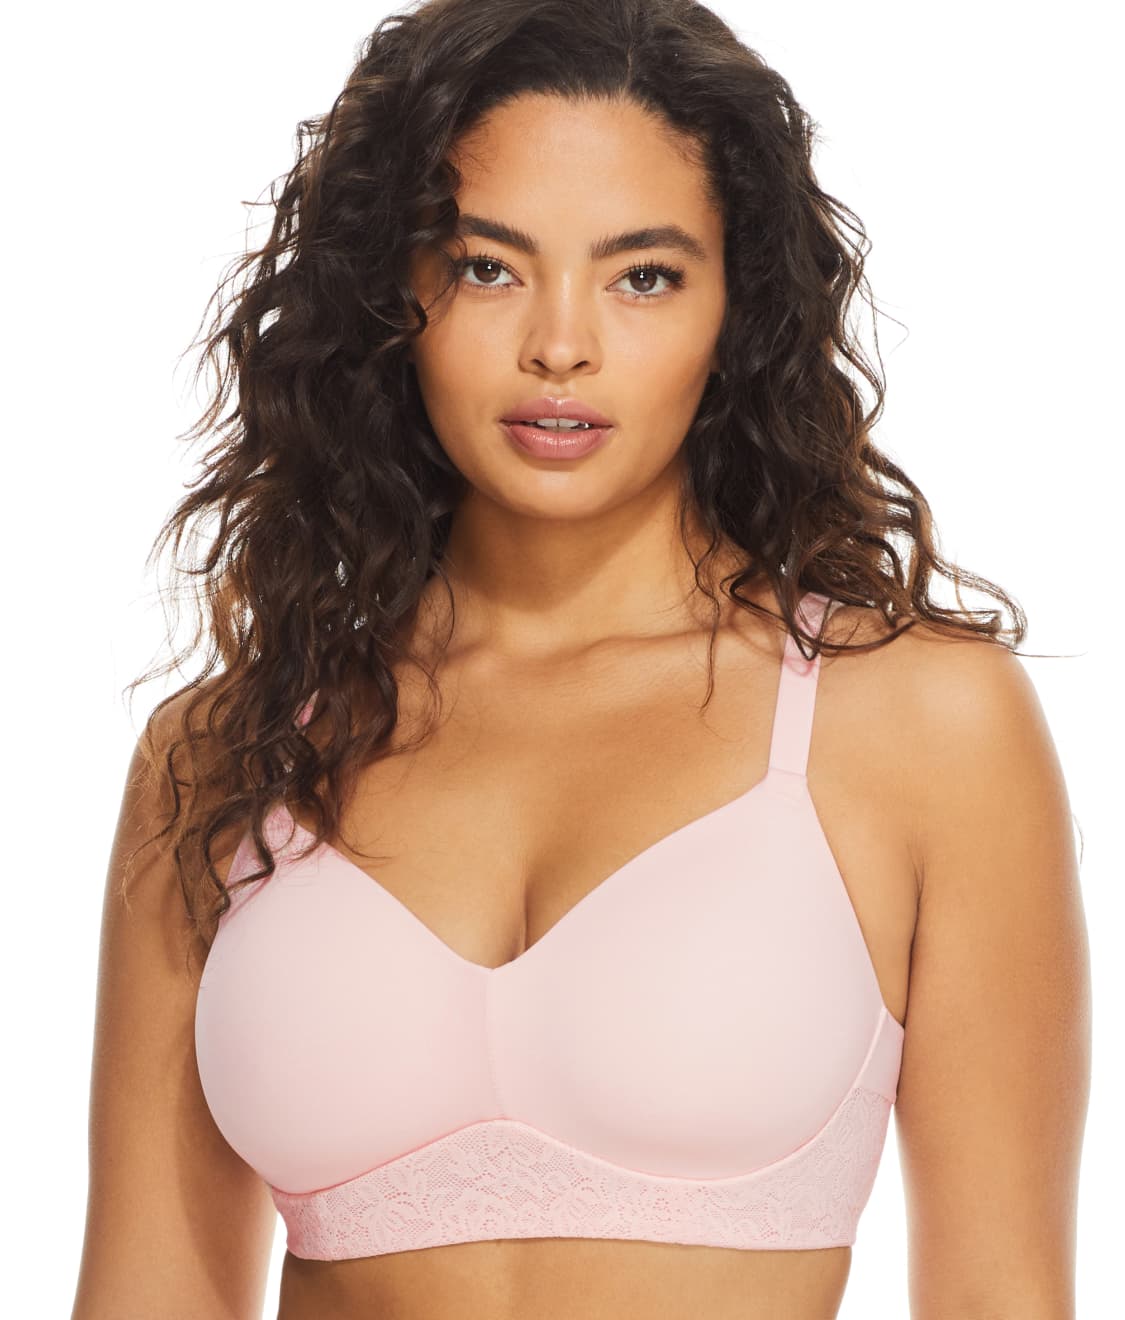 BARE NECESSITIES - Bras can serve a twofold purpose. They give support,  first and foremost, but the details they can add to an everyday outfit  should not be overlooked. Happy to have